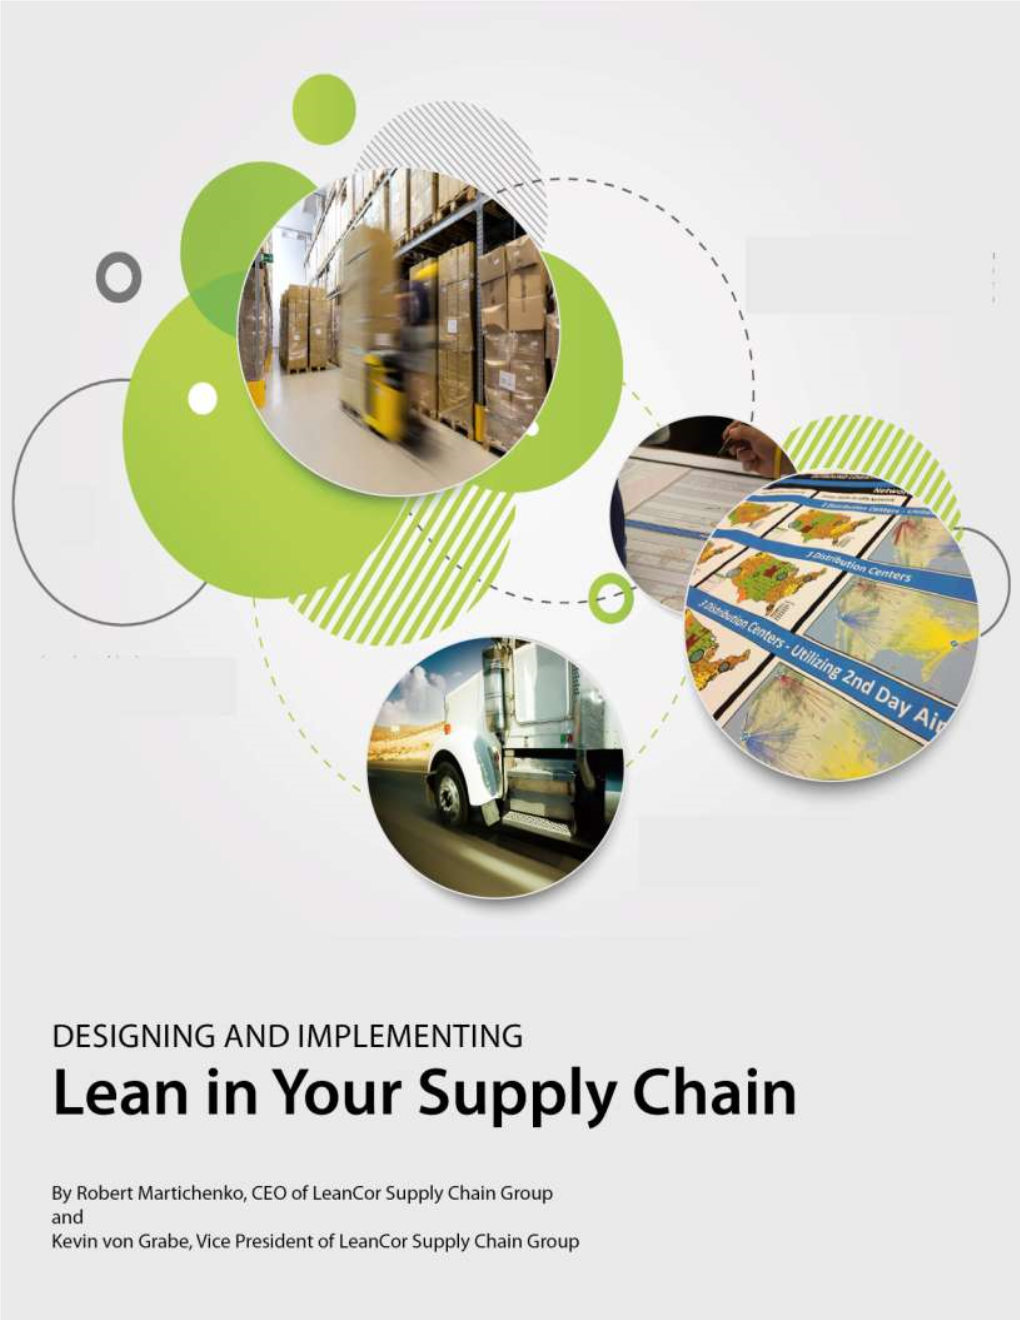 Designing and Implementing Lean in Your Supply Chain (2007, Lean Enterprise Institute)